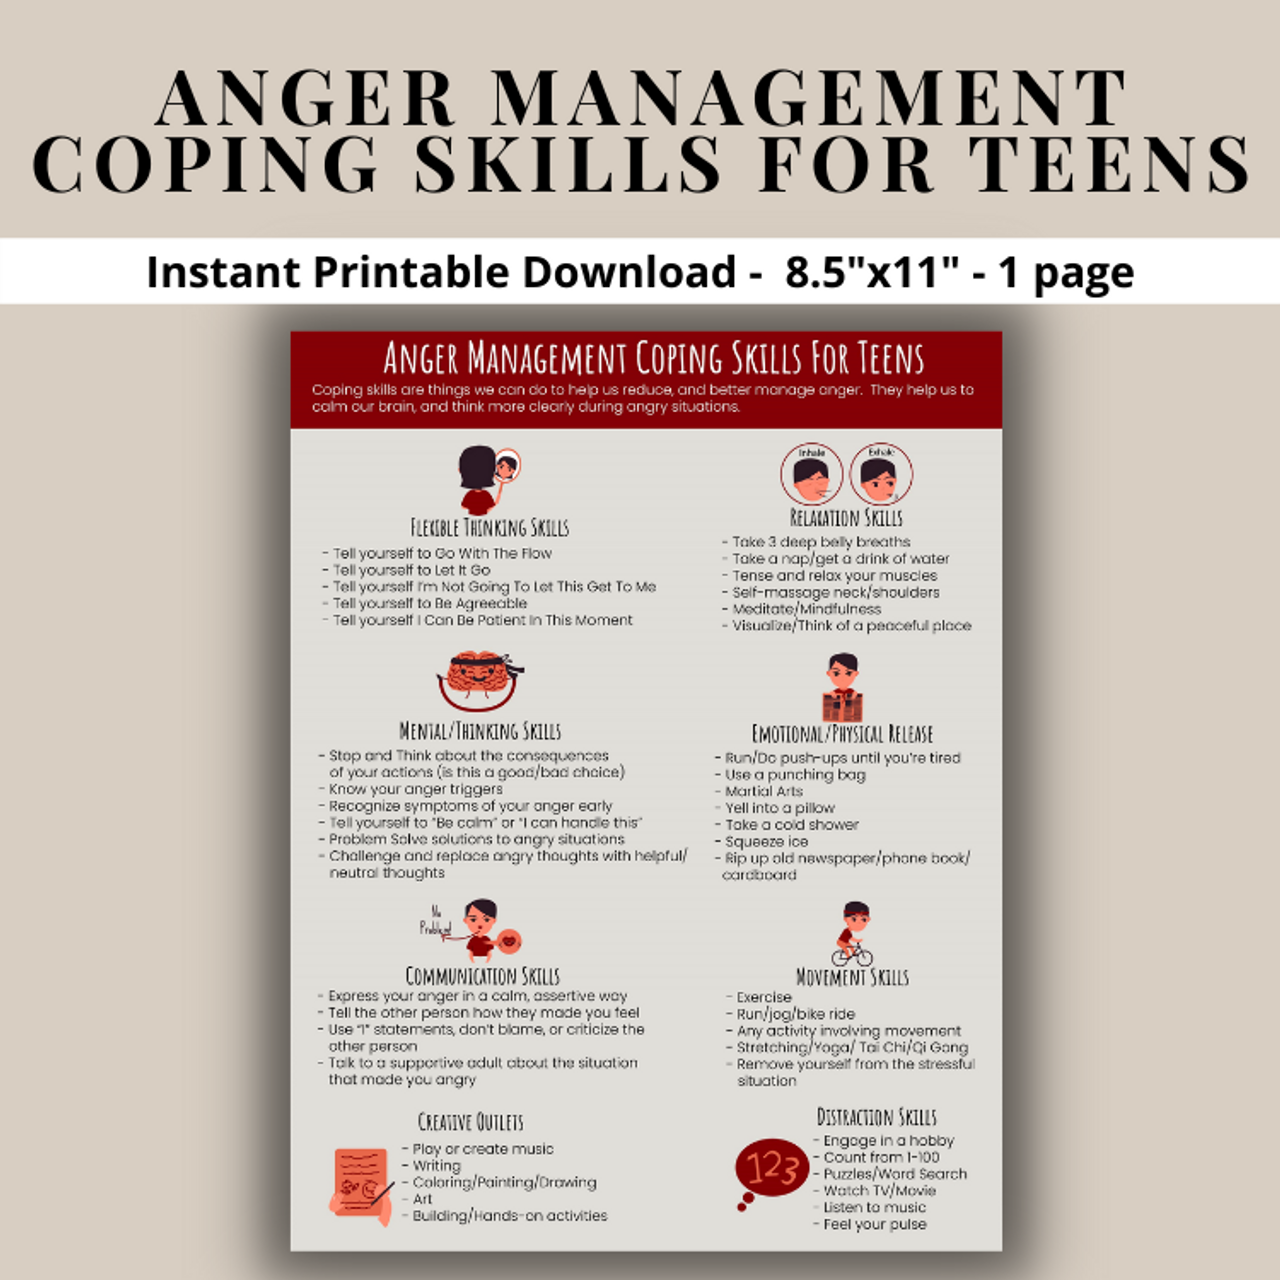 Anger Management Coping Skills For Teens Printable Poster - Managing Anger Handout - Teen Calming Skills Calm Down Strategies